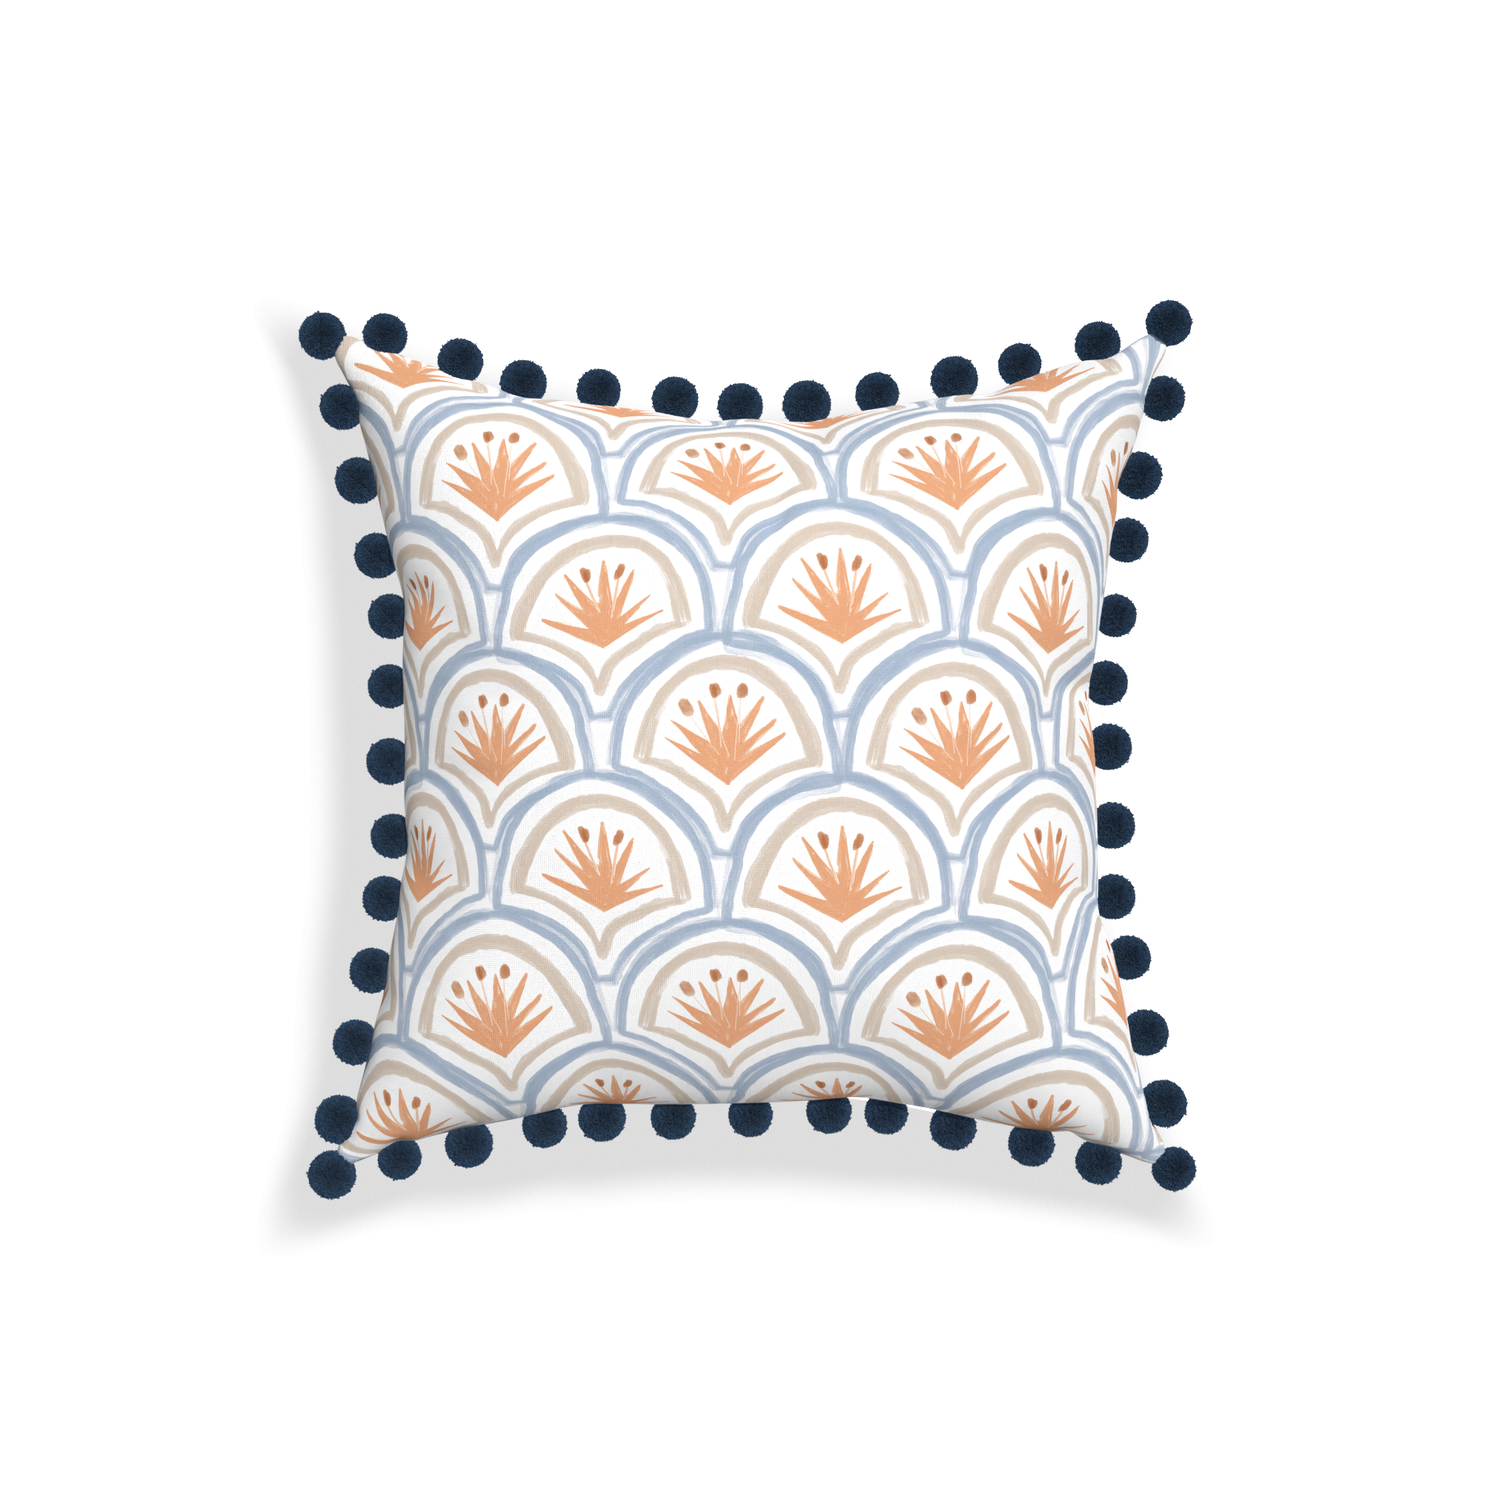 18-square thatcher apricot custom art deco palm patternpillow with c on white background